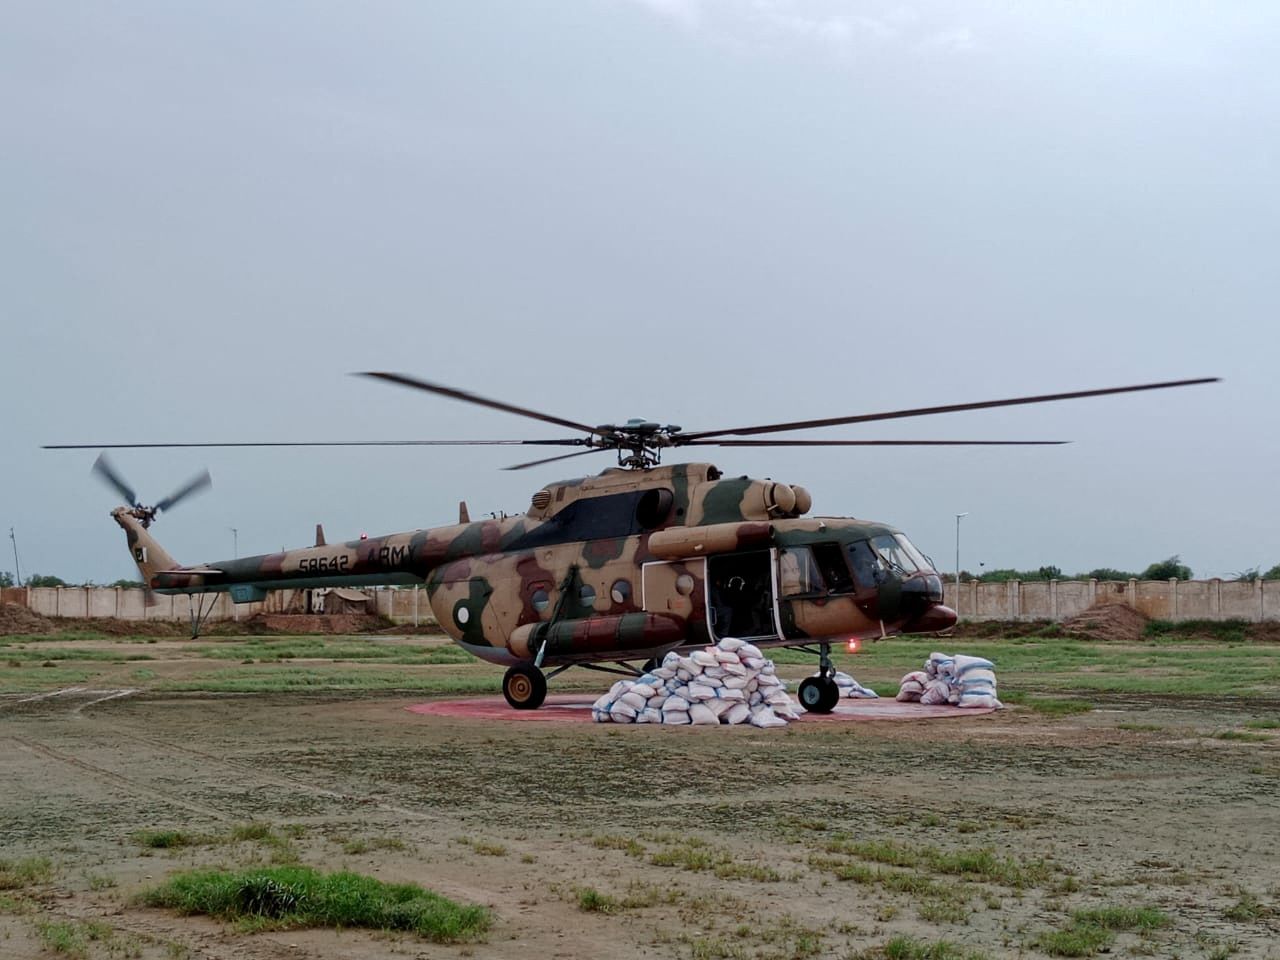 An army helicopter gets ready during a relief operation, in Sawat, Pakistan August 29, 2022. Inter Services Public Relations (ISPR)/Handout via REUTERS ATTENTION EDITORS - THIS PICTURE WAS PROVIDED BY A THIRD PARTY. NO RESALES. NO ARCHIVE. - via REUTERS